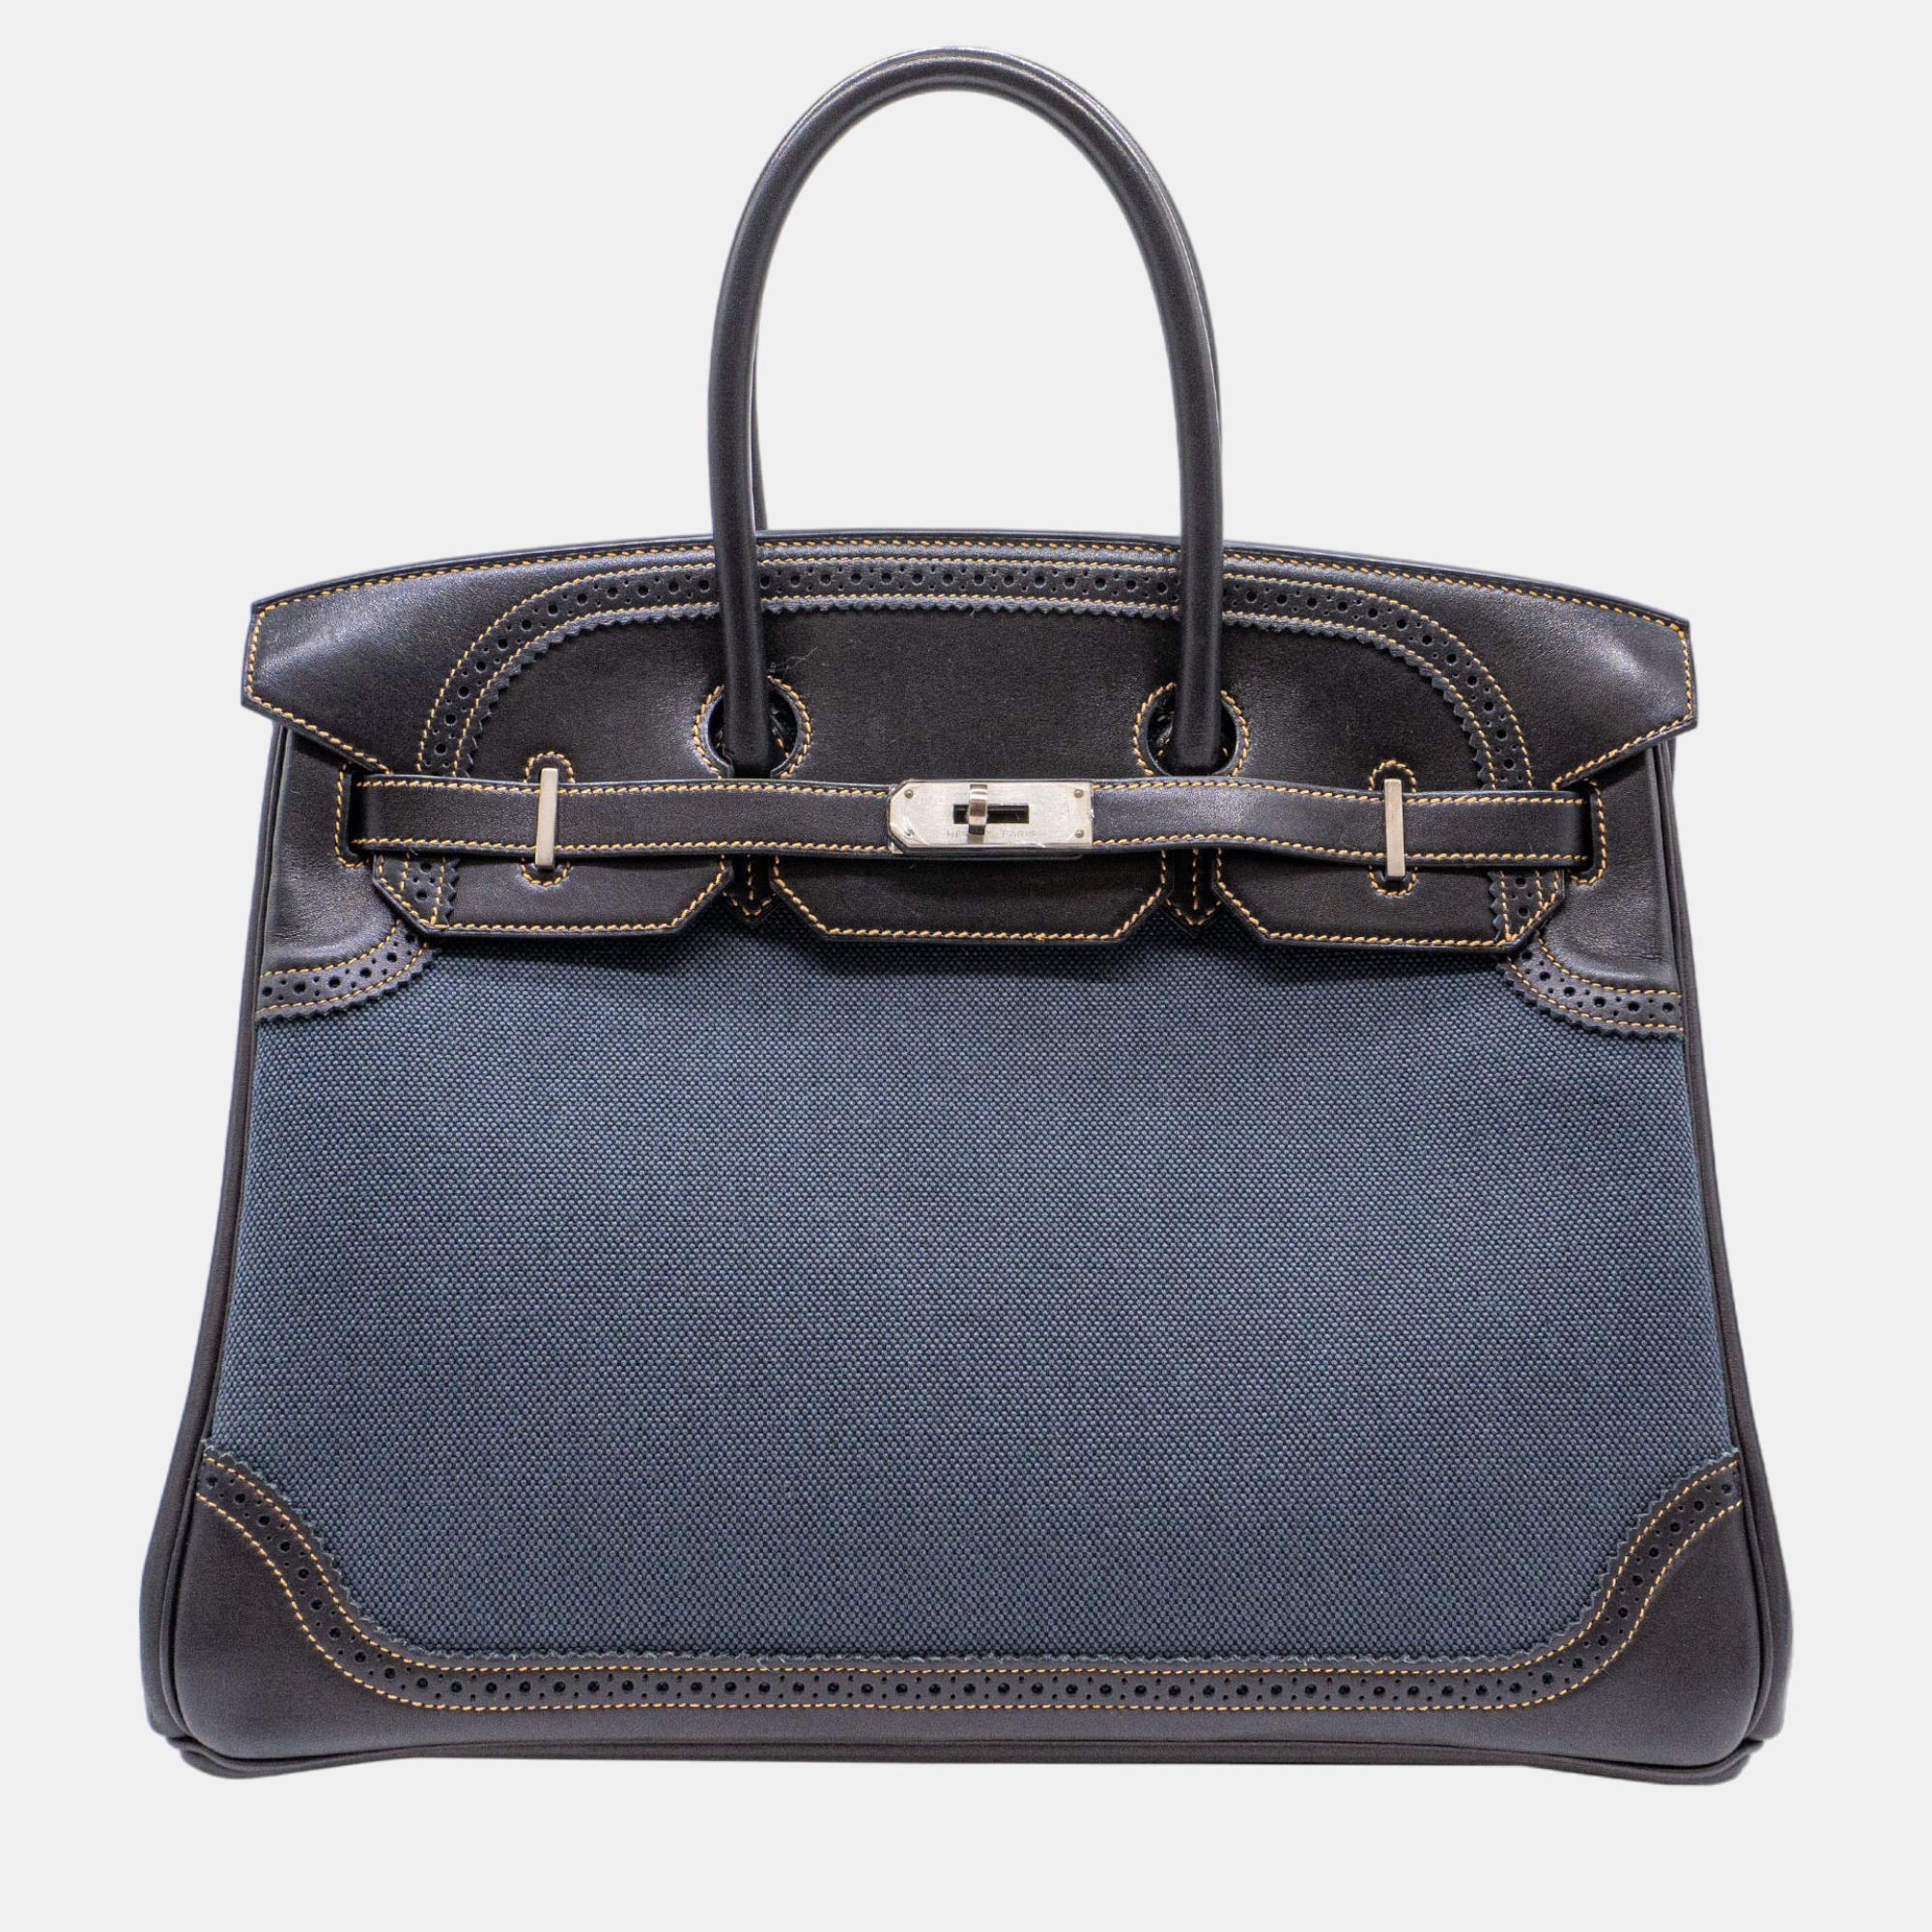 Pre-owned Hermes Hermès Birkin 35 Ghillies In Denim Fonce Toile & Black Evercalf Leather With Phw Bag